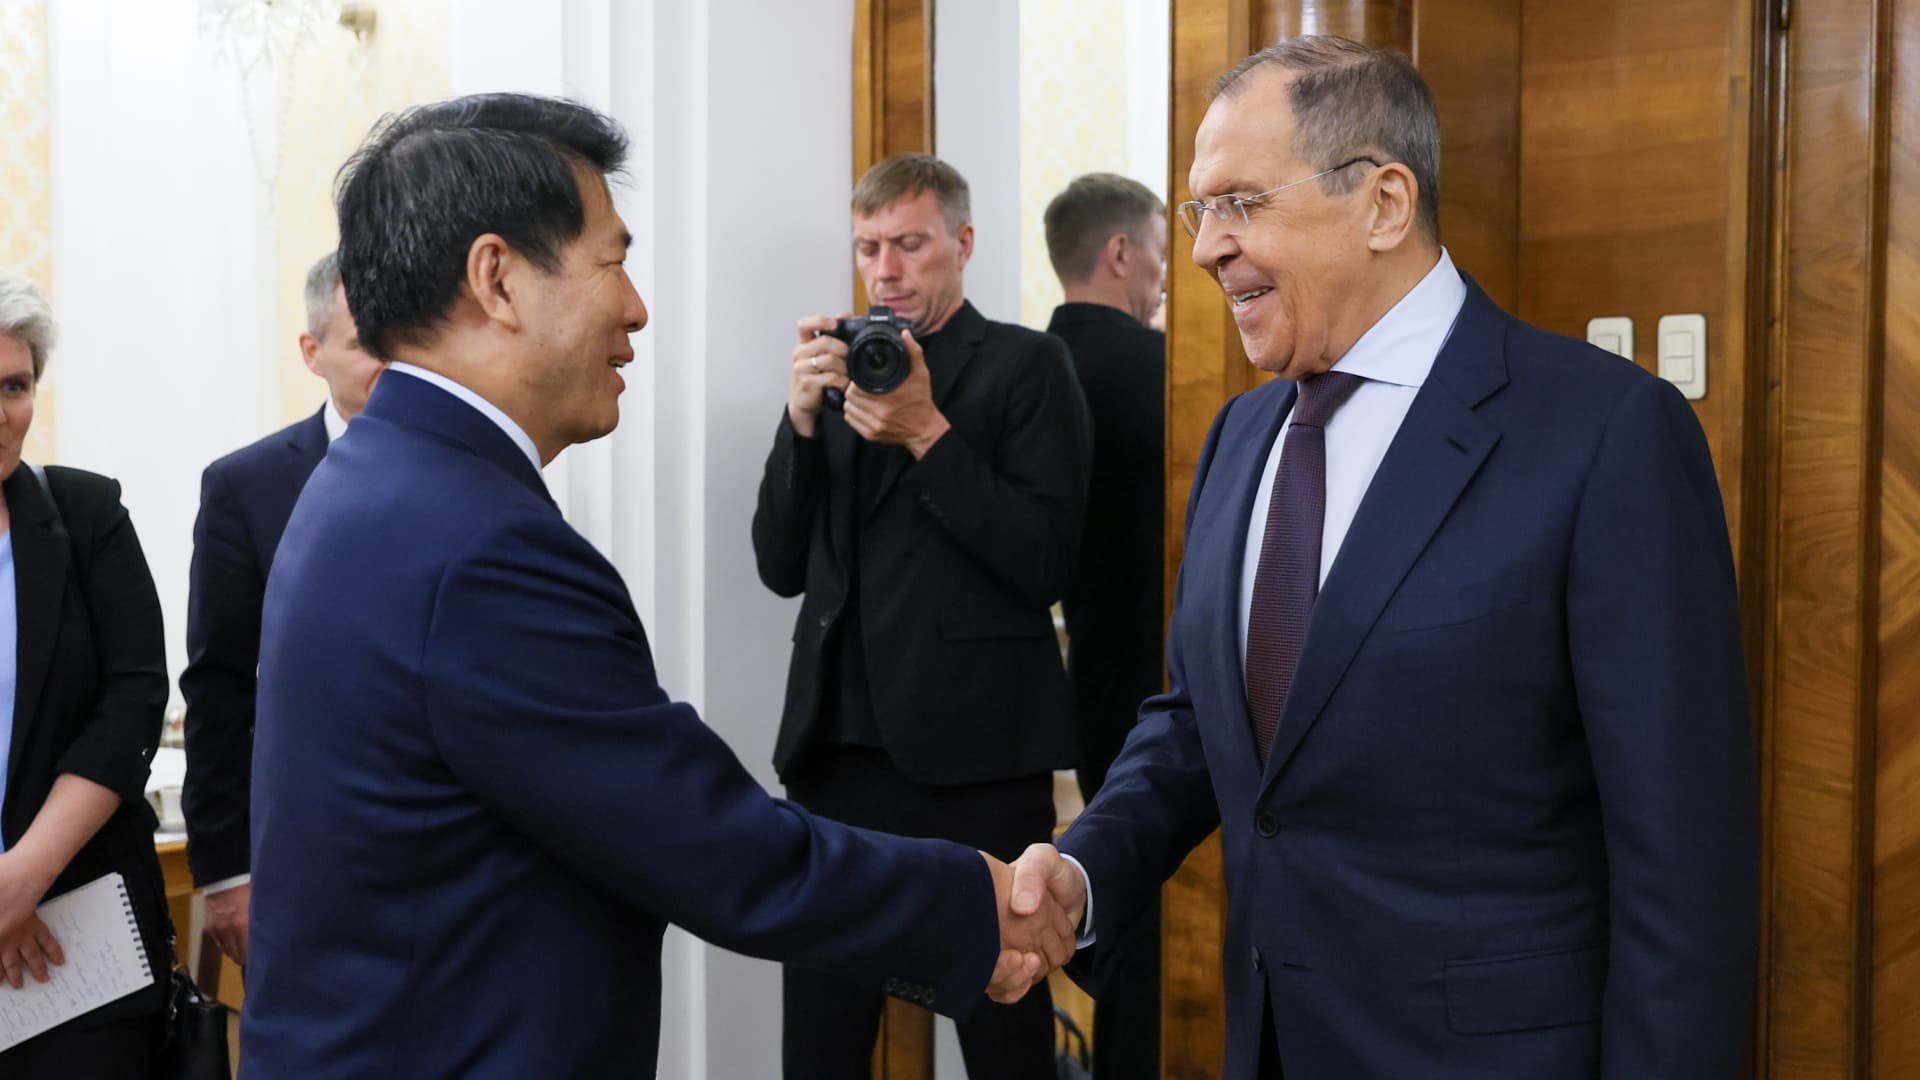 Russian Foreign Minister Sergei Lavrov (R) welcomes the Special Representative of the Chinese Government on Eurasian Affairs Li Hui (L) at the Russian Foreign Ministry headquarters in Moscow, Russia on May 26, 2023.